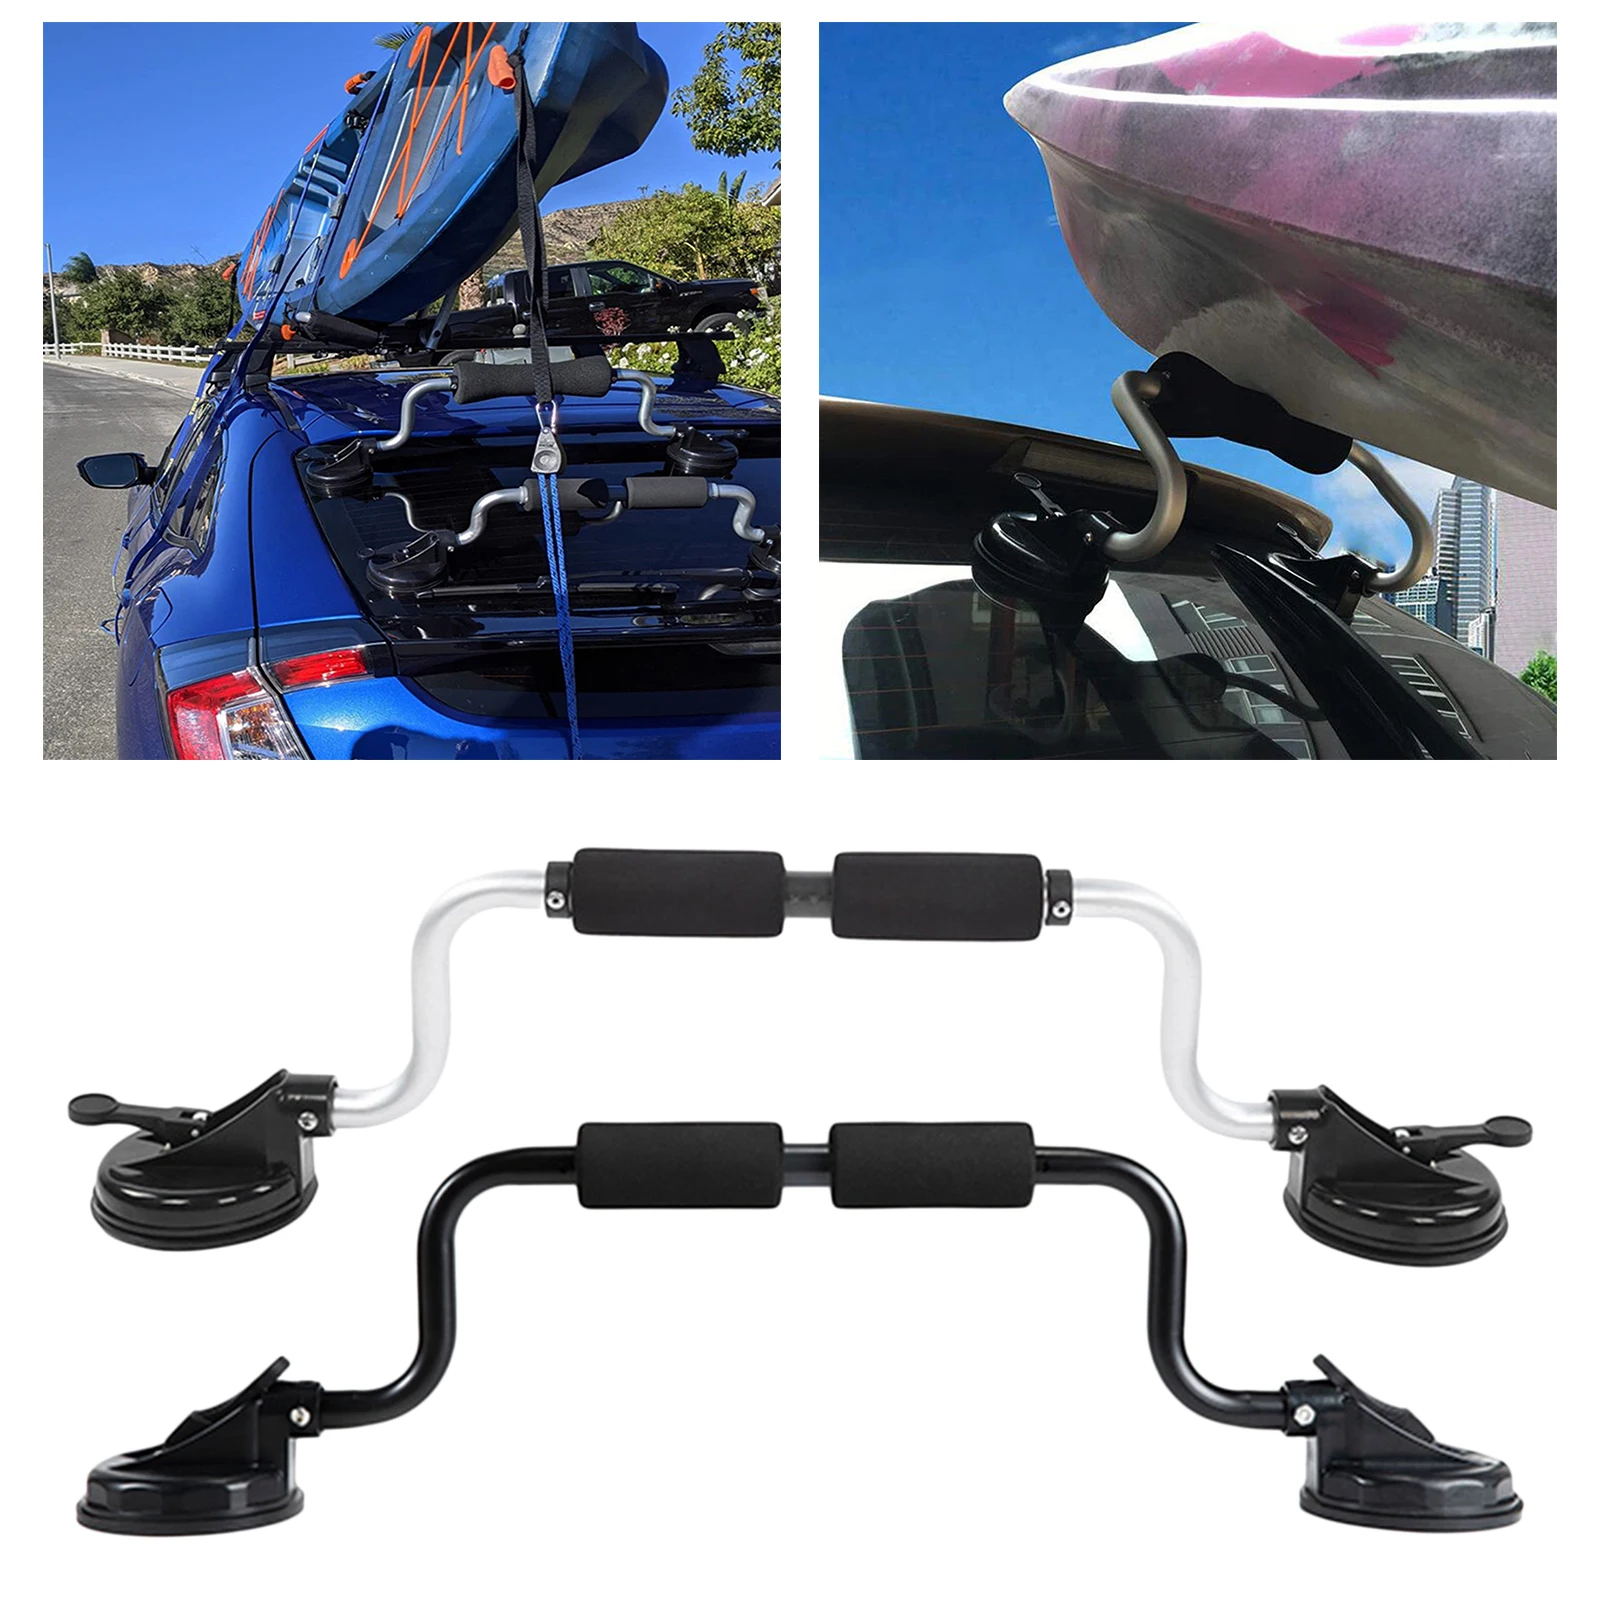 Boat Pusher Suction Cup Holder, Suction Boat Roller Load Assist For Mounting Kayaks And Canoes To Car Tops